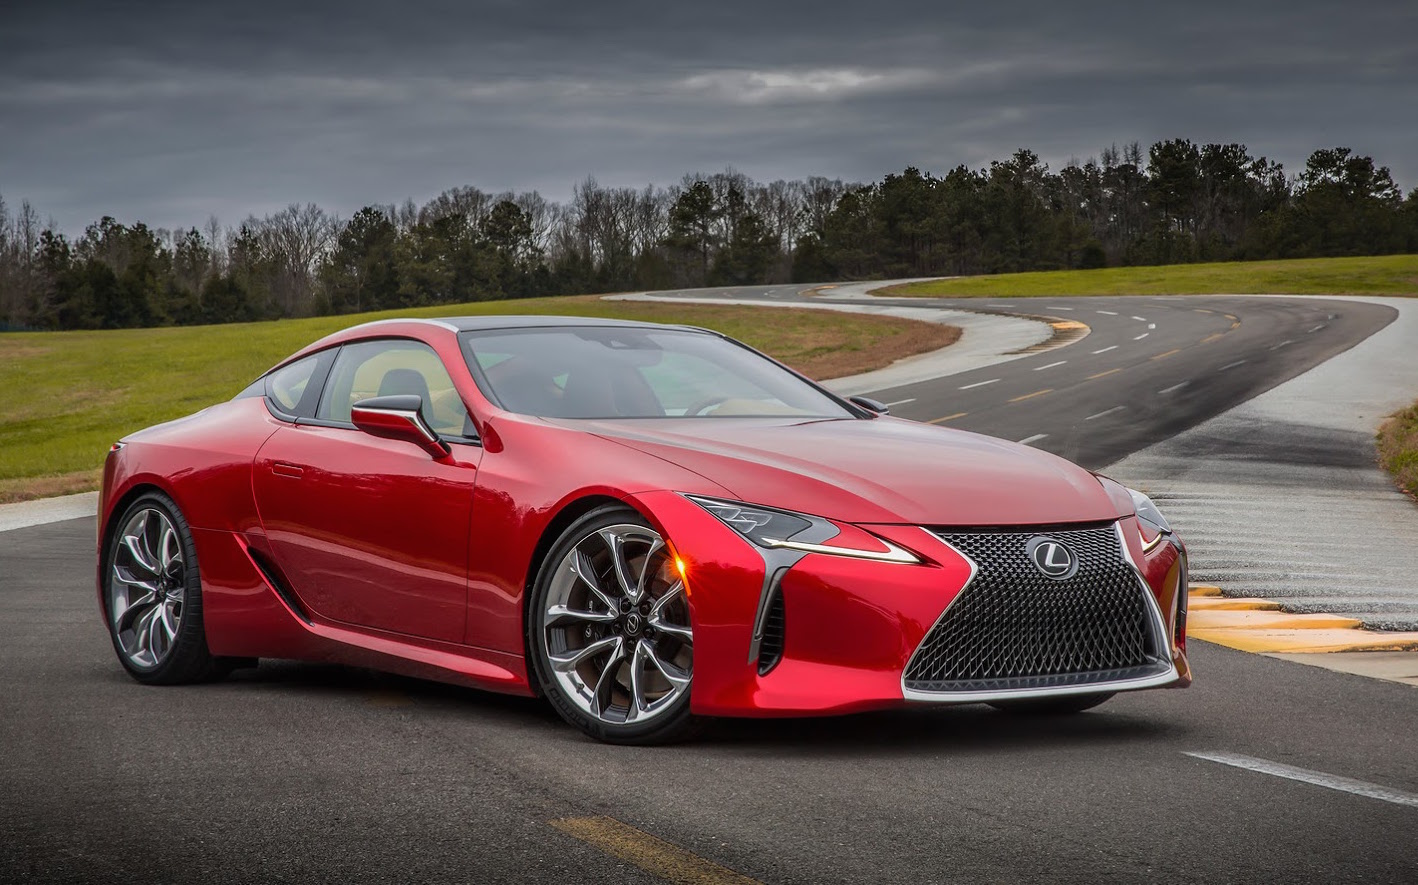 Image: The Lexus LC 500, a sleek and stylish luxury sports coupe, featuring a captivating design, powerful performance, and cutting-edge technology.